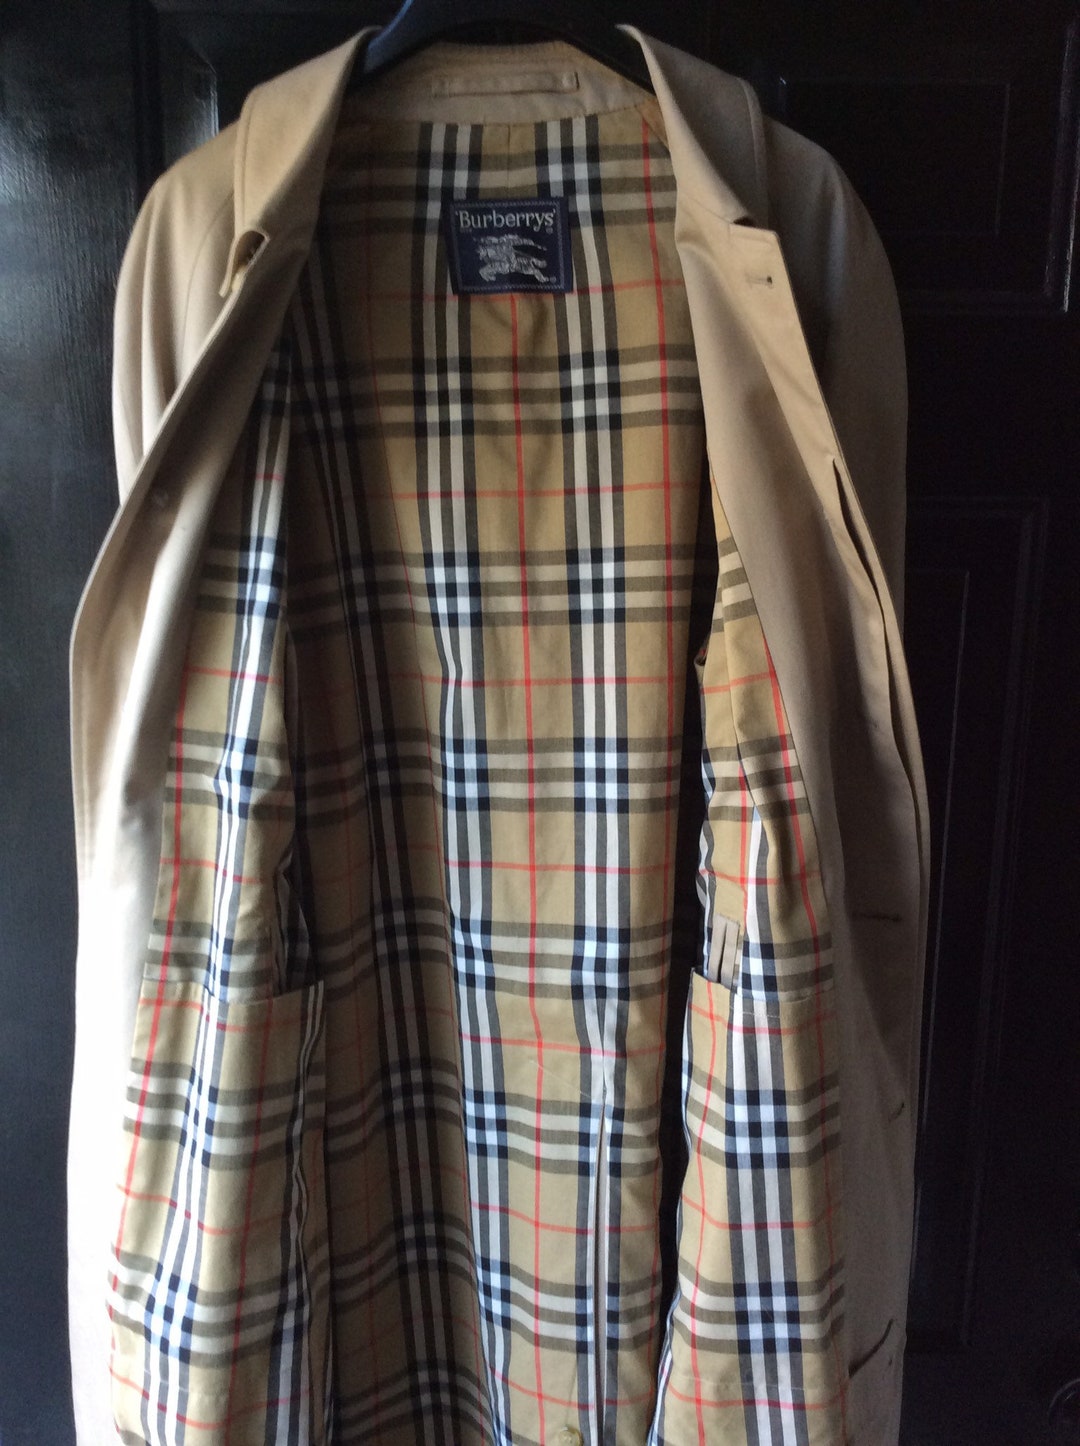 Burberry Trench Coat Size 42 Long - Etsy